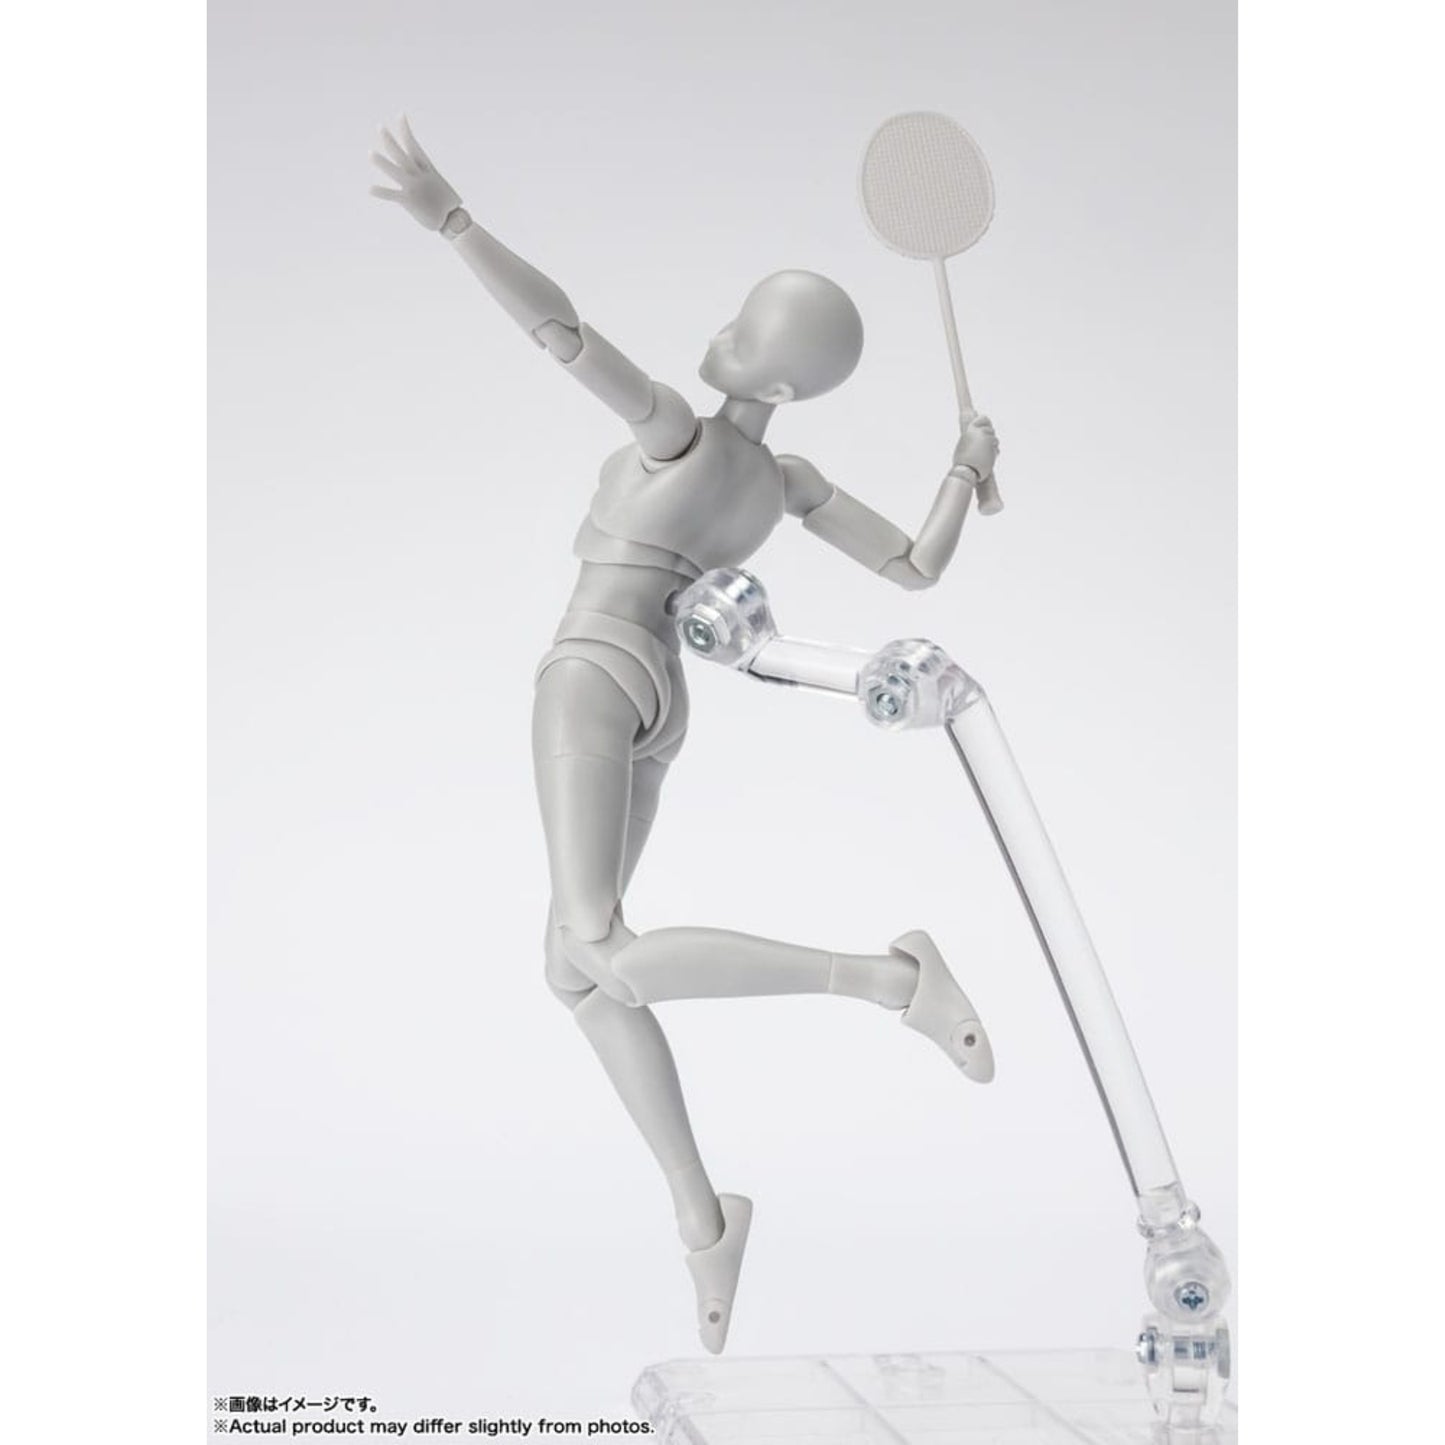 S.H.F. Actionfigur Body-Chan: Sports Edition DX Set (Gray Color Ver.)